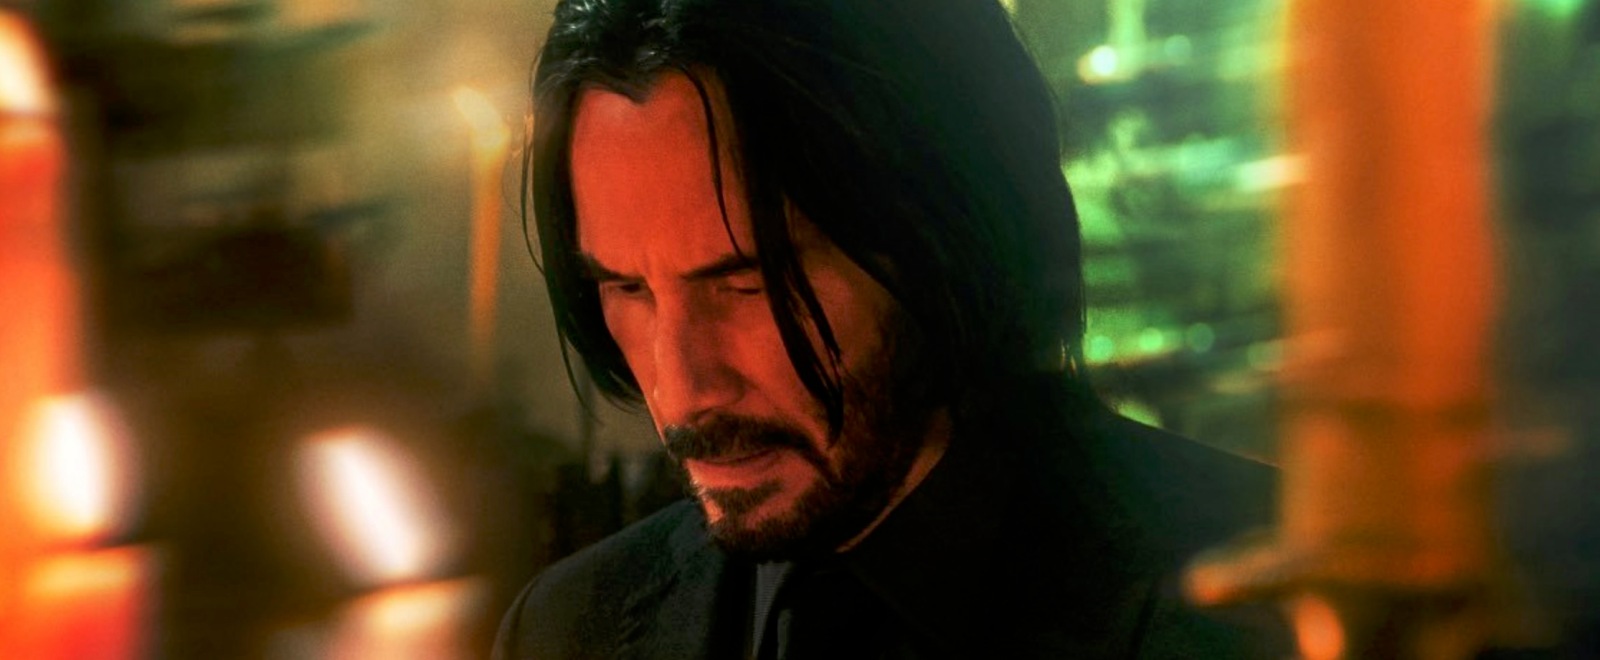 John Wick: Chapter 4 - Official Teaser Trailer (Keanu Reeves, Donnie Yen)